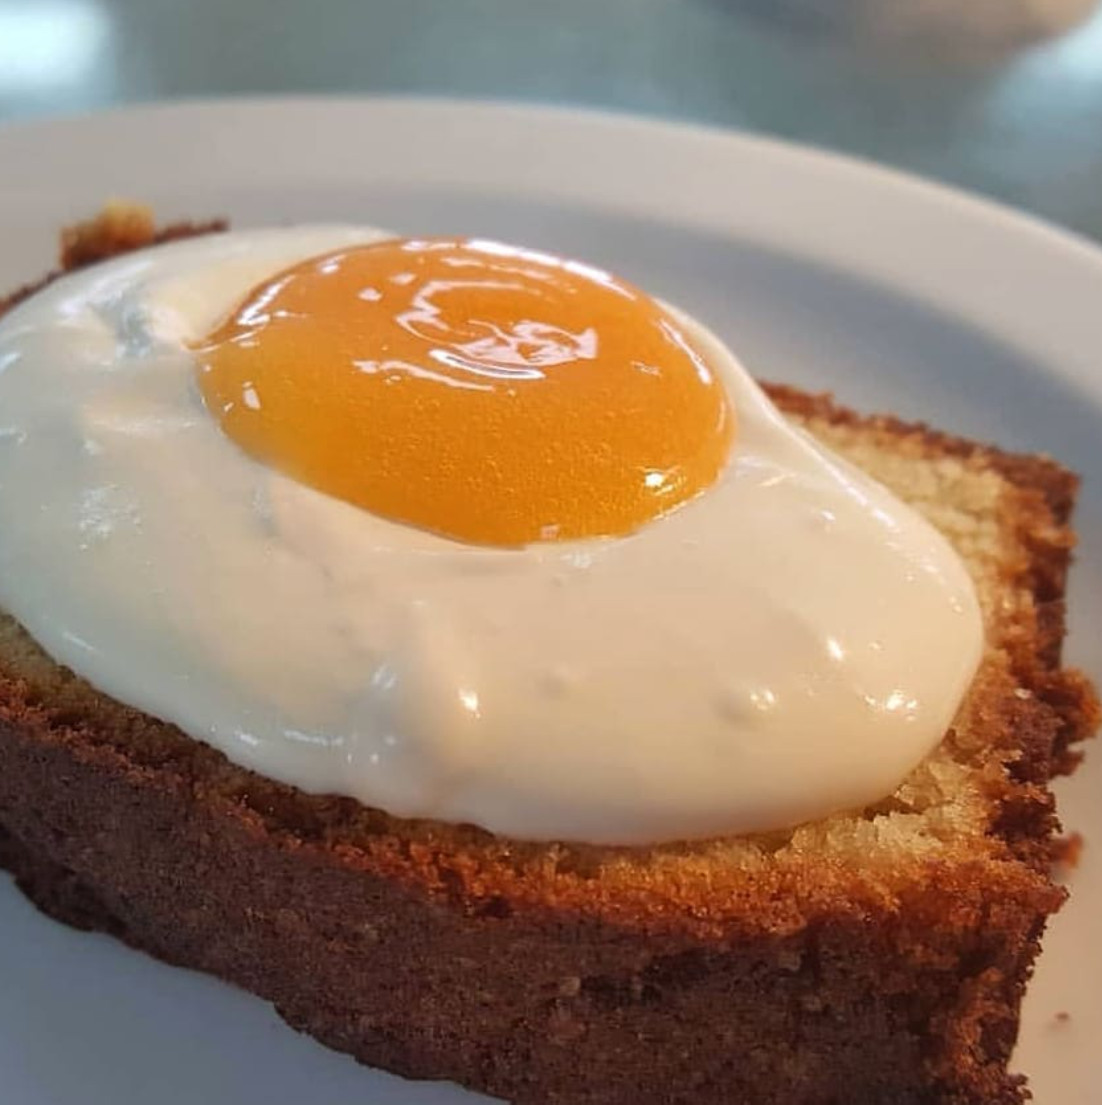 Toast with an egg on it on a white plate, food llusion from chefbenchurchill instagram